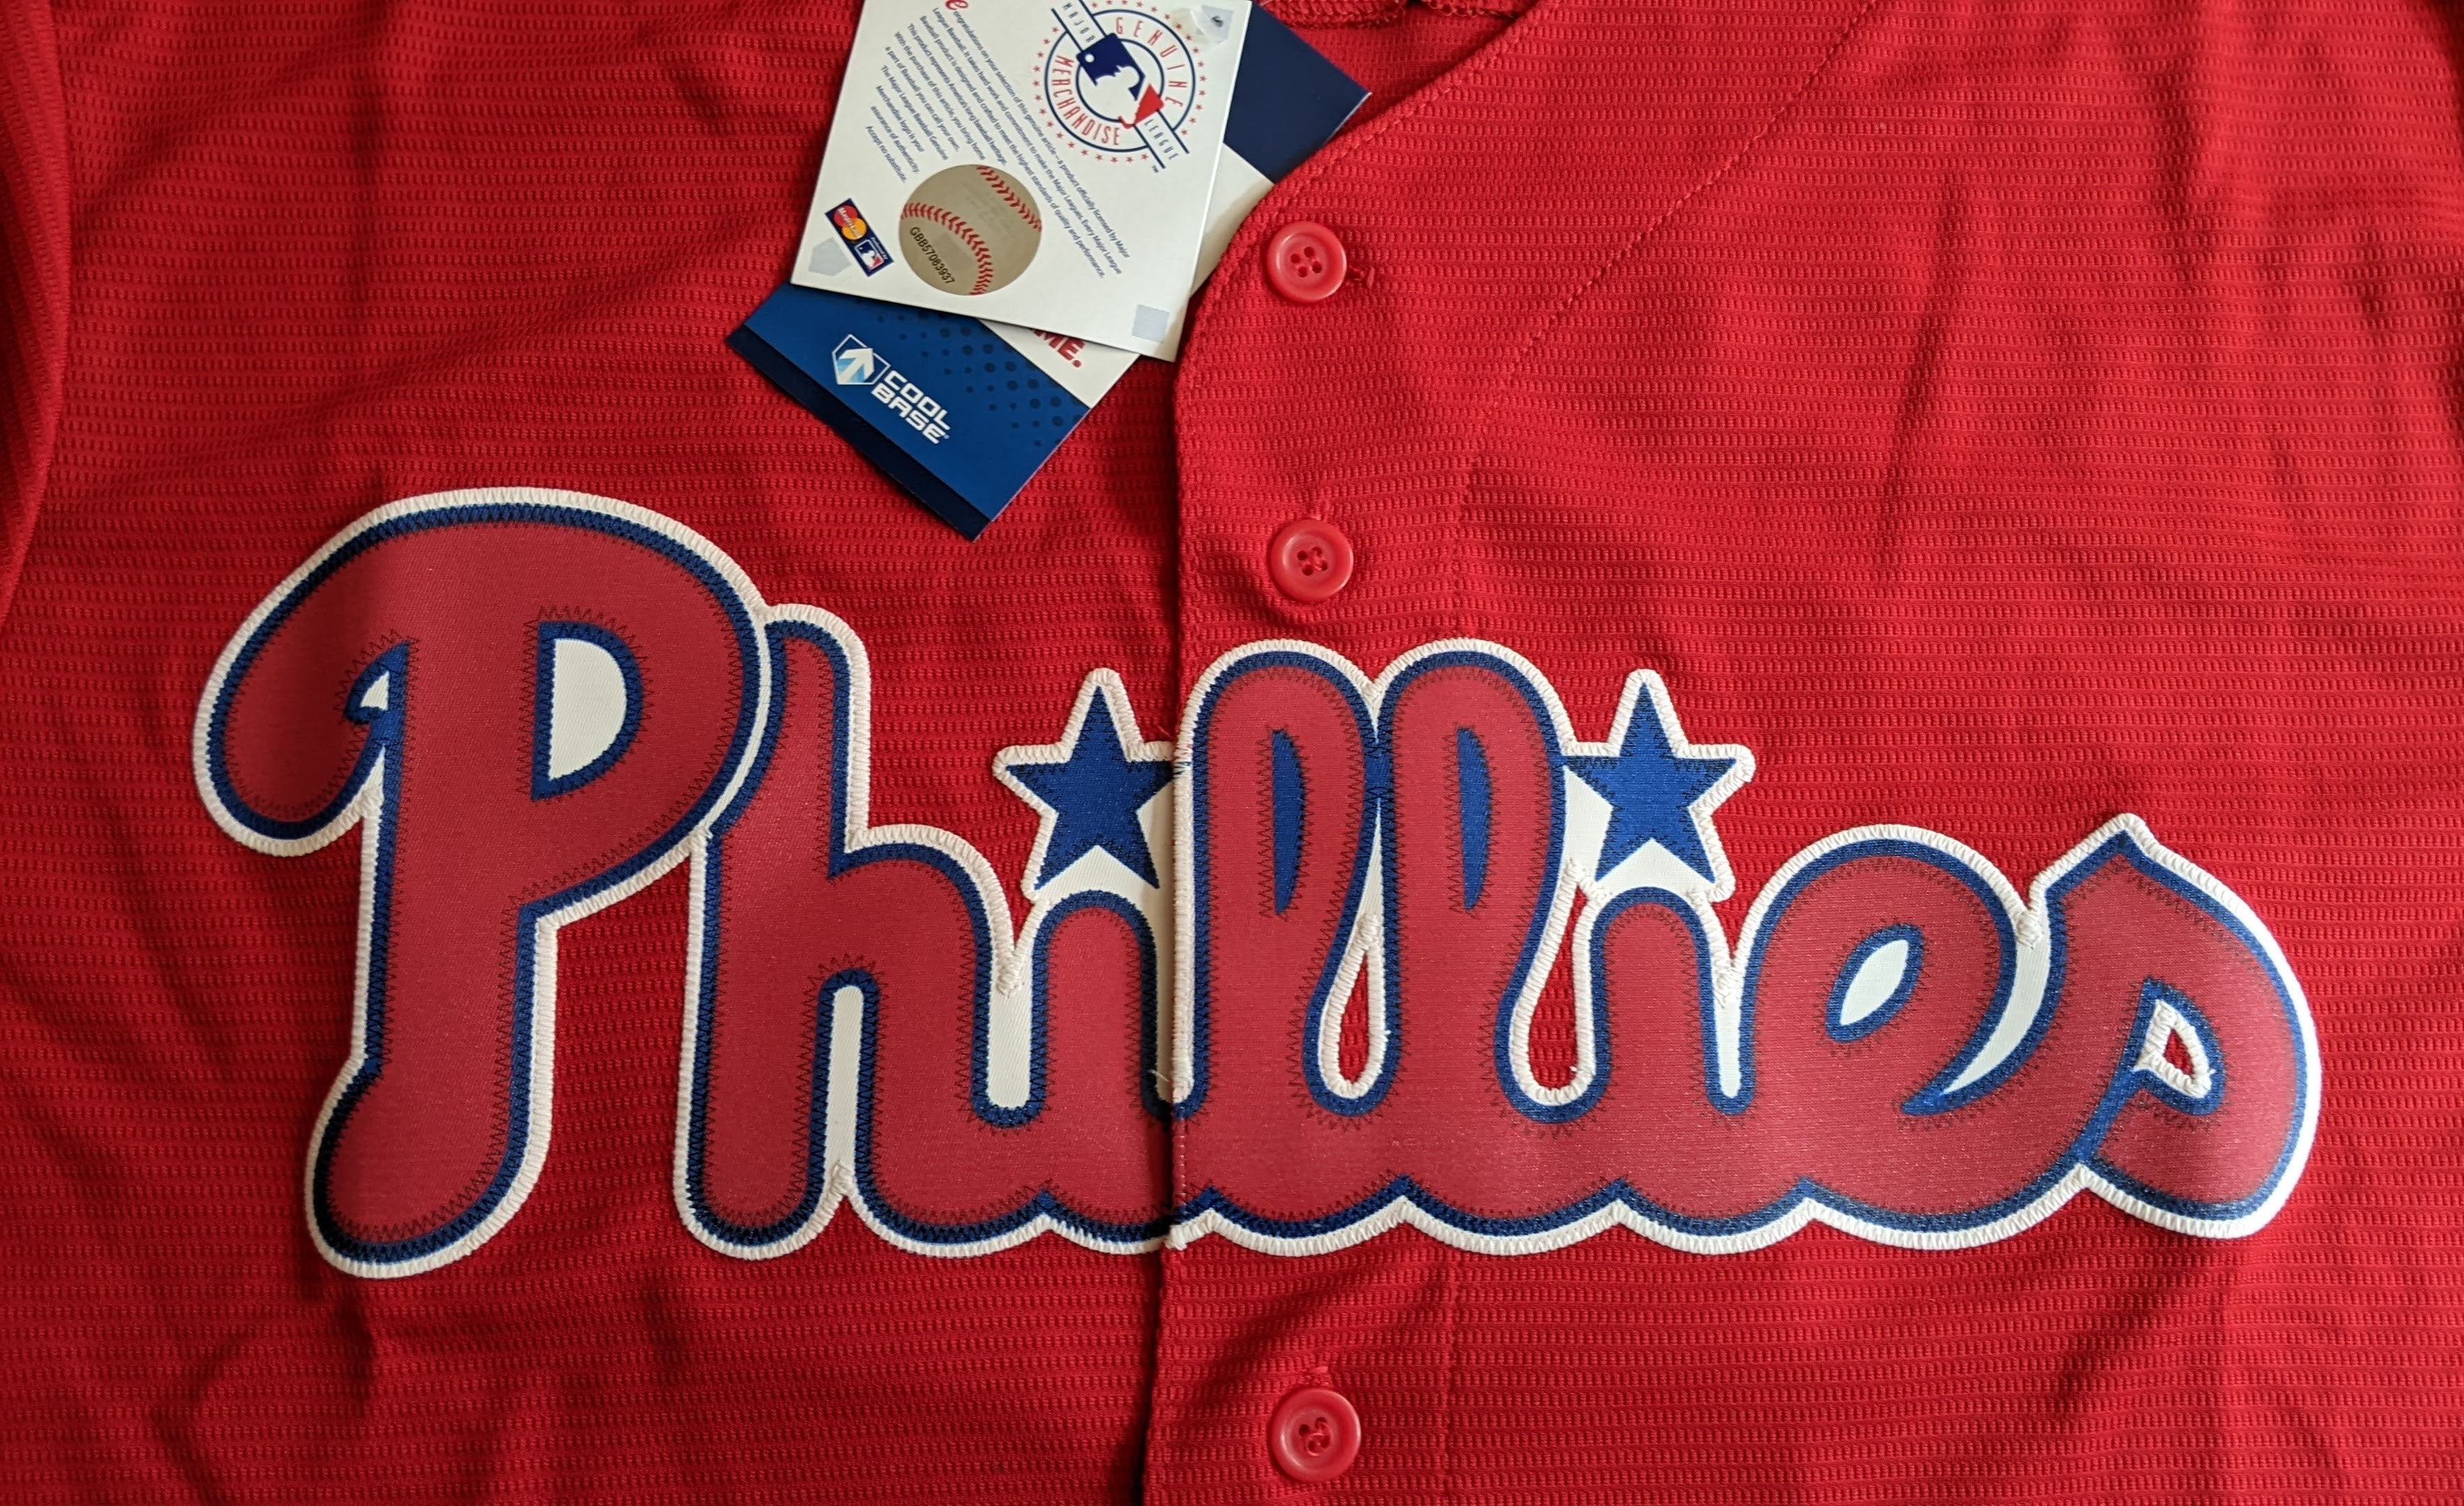 New Rhys Hoskins Phillies Jersey - Large Adult Unisex Majestic